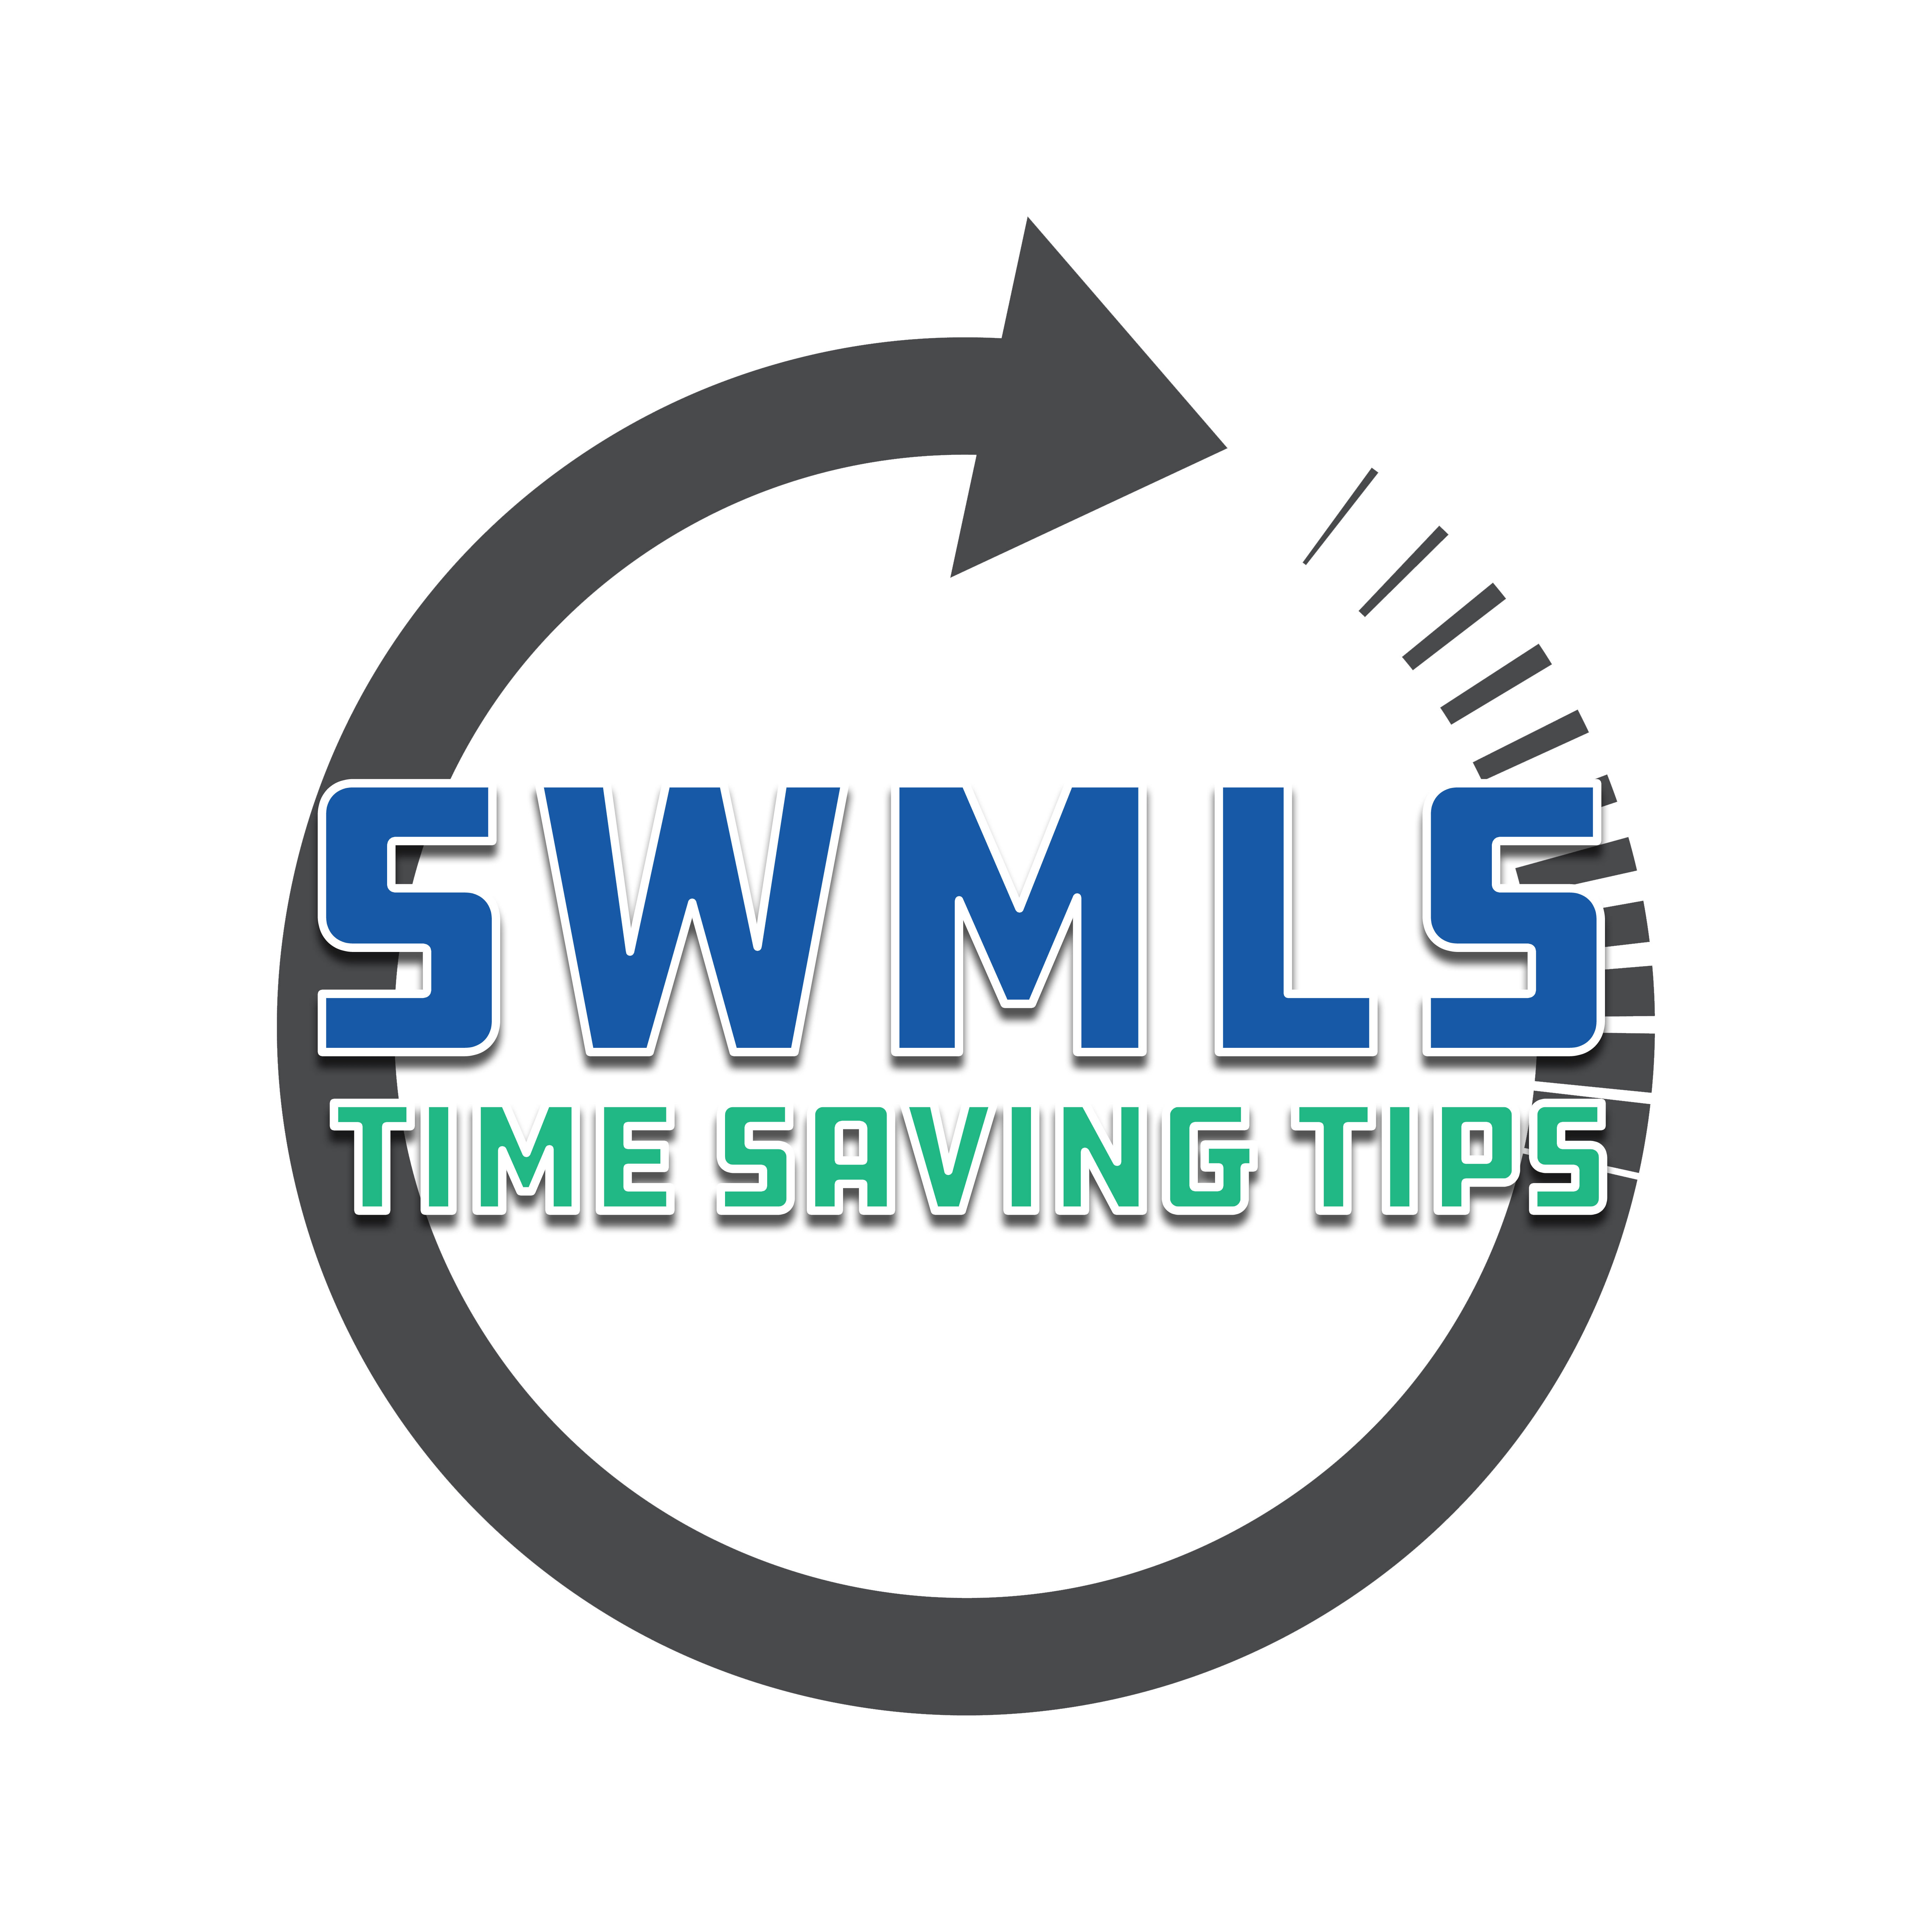 SWMLS Time Saving Tip: Where to find GIS Maps